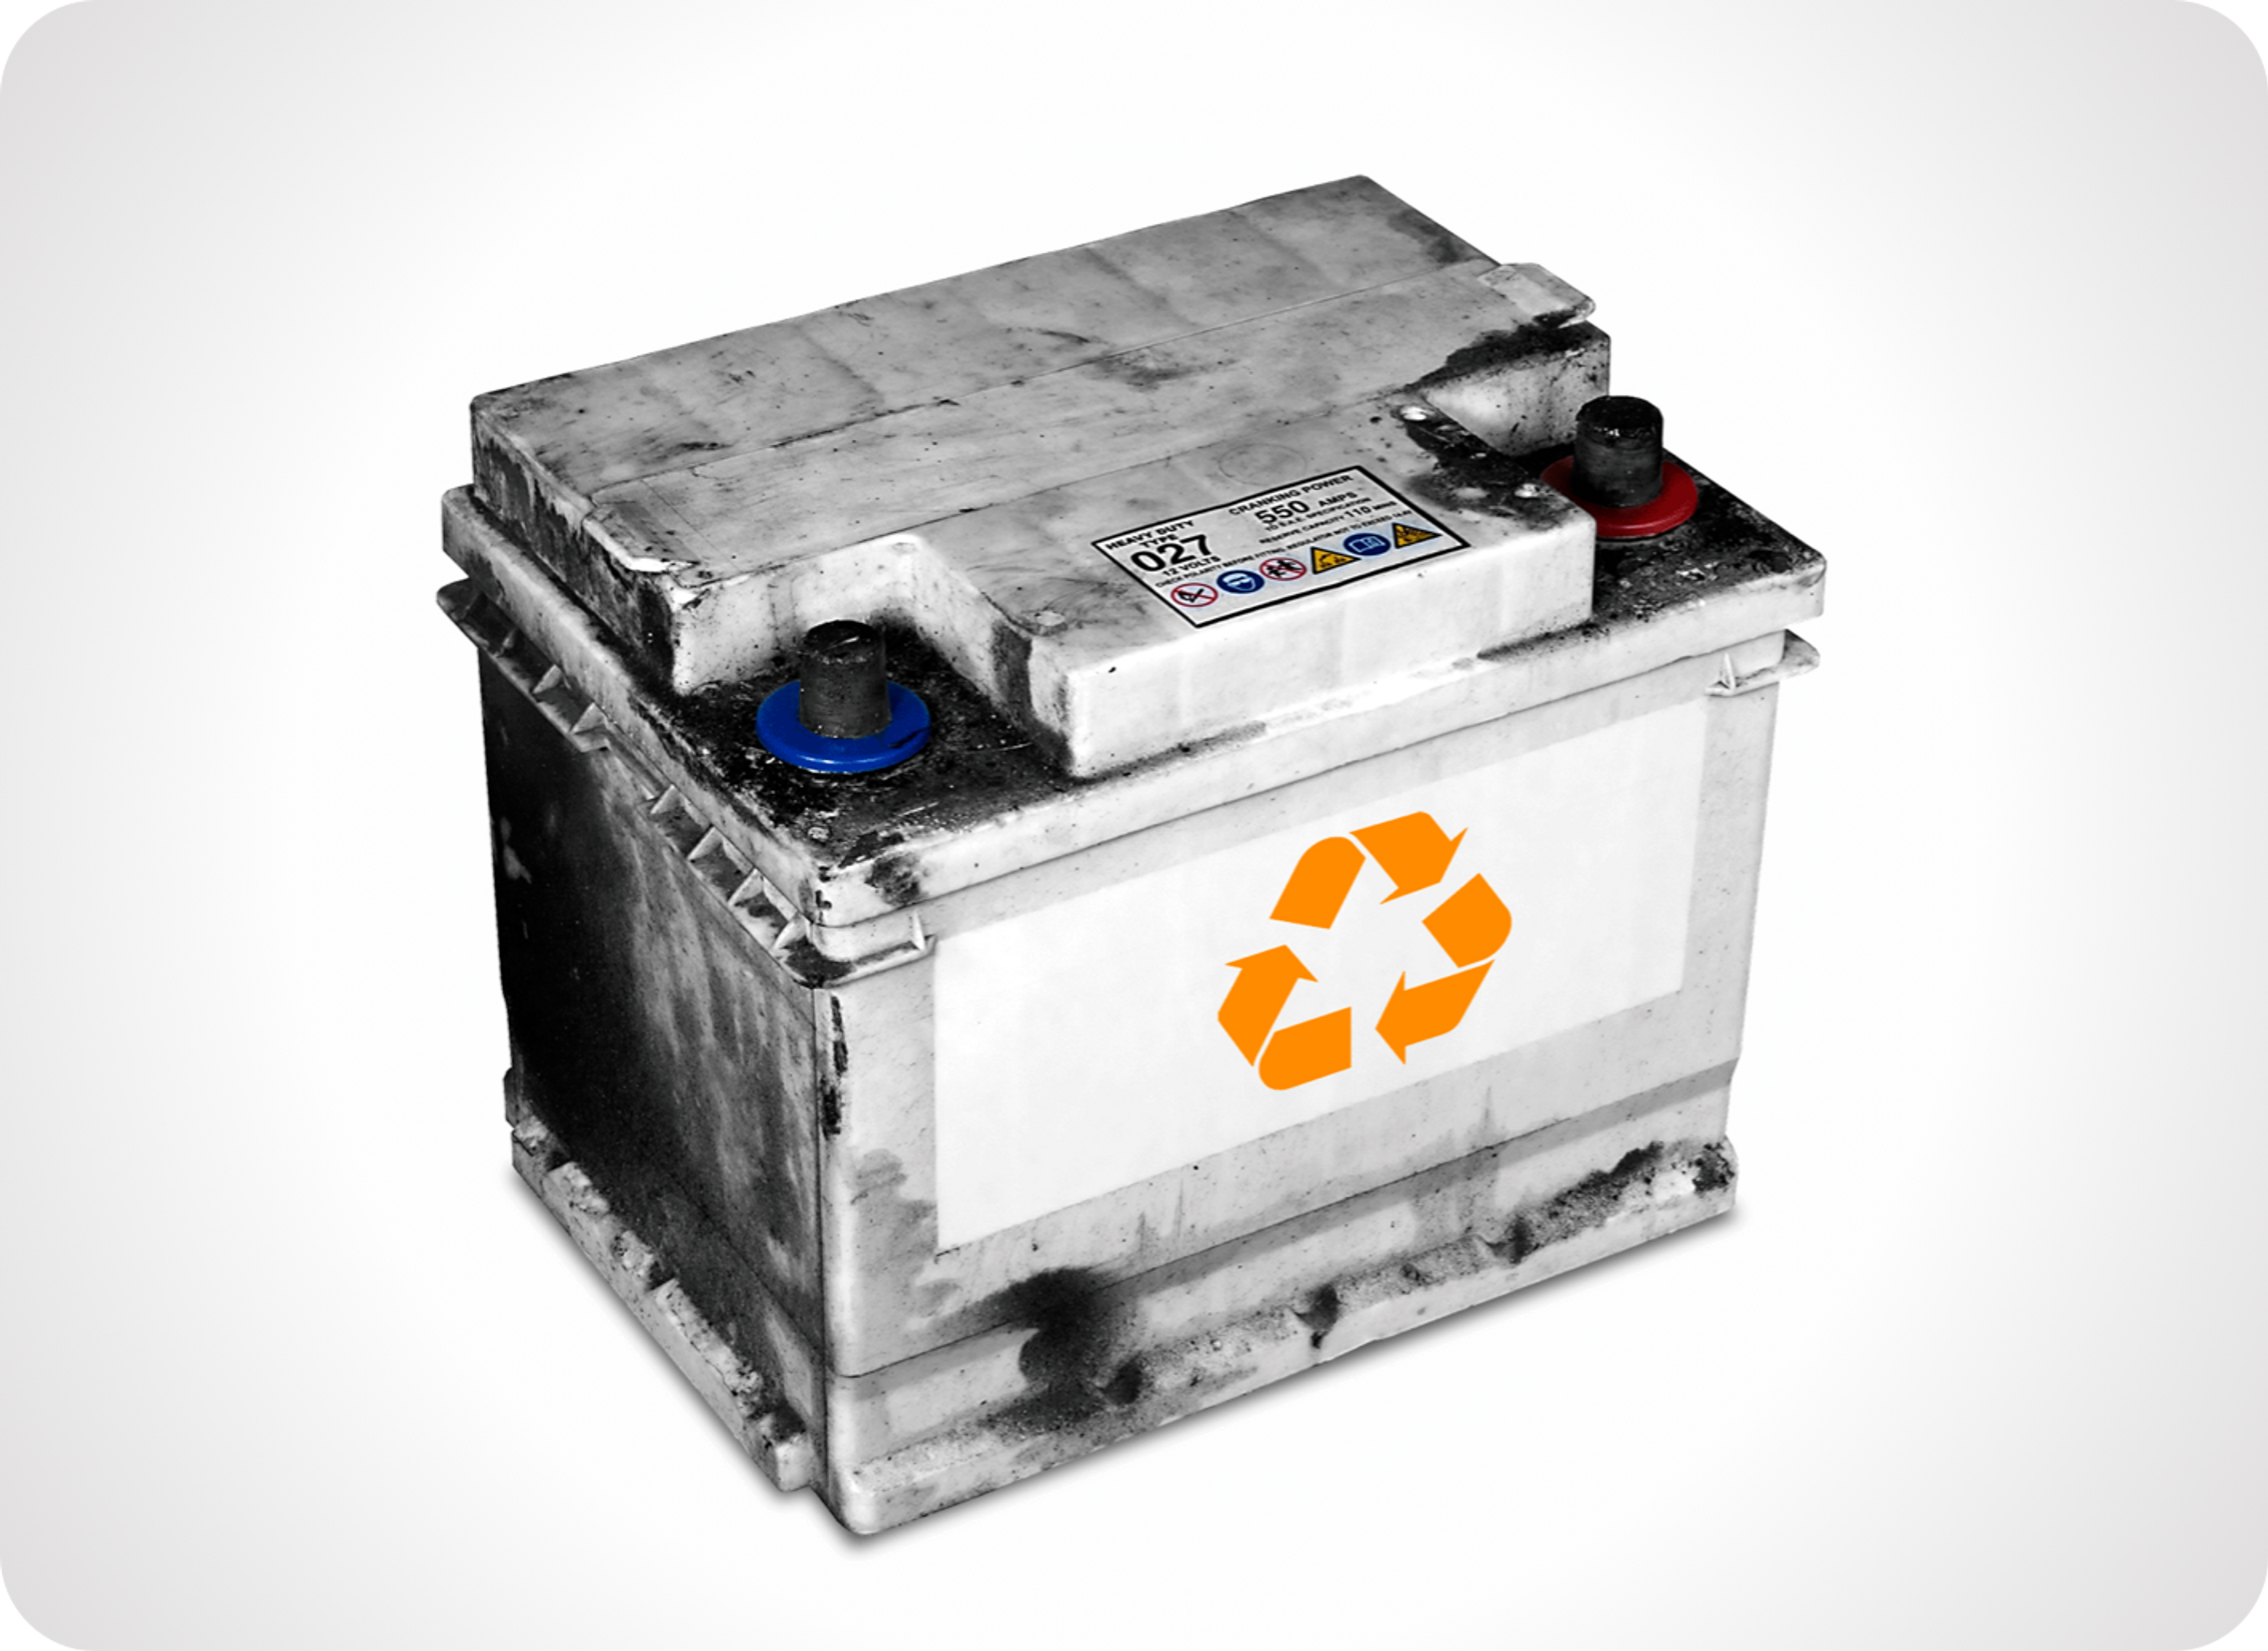 Picture of used car battery with an orange recycle logo on it